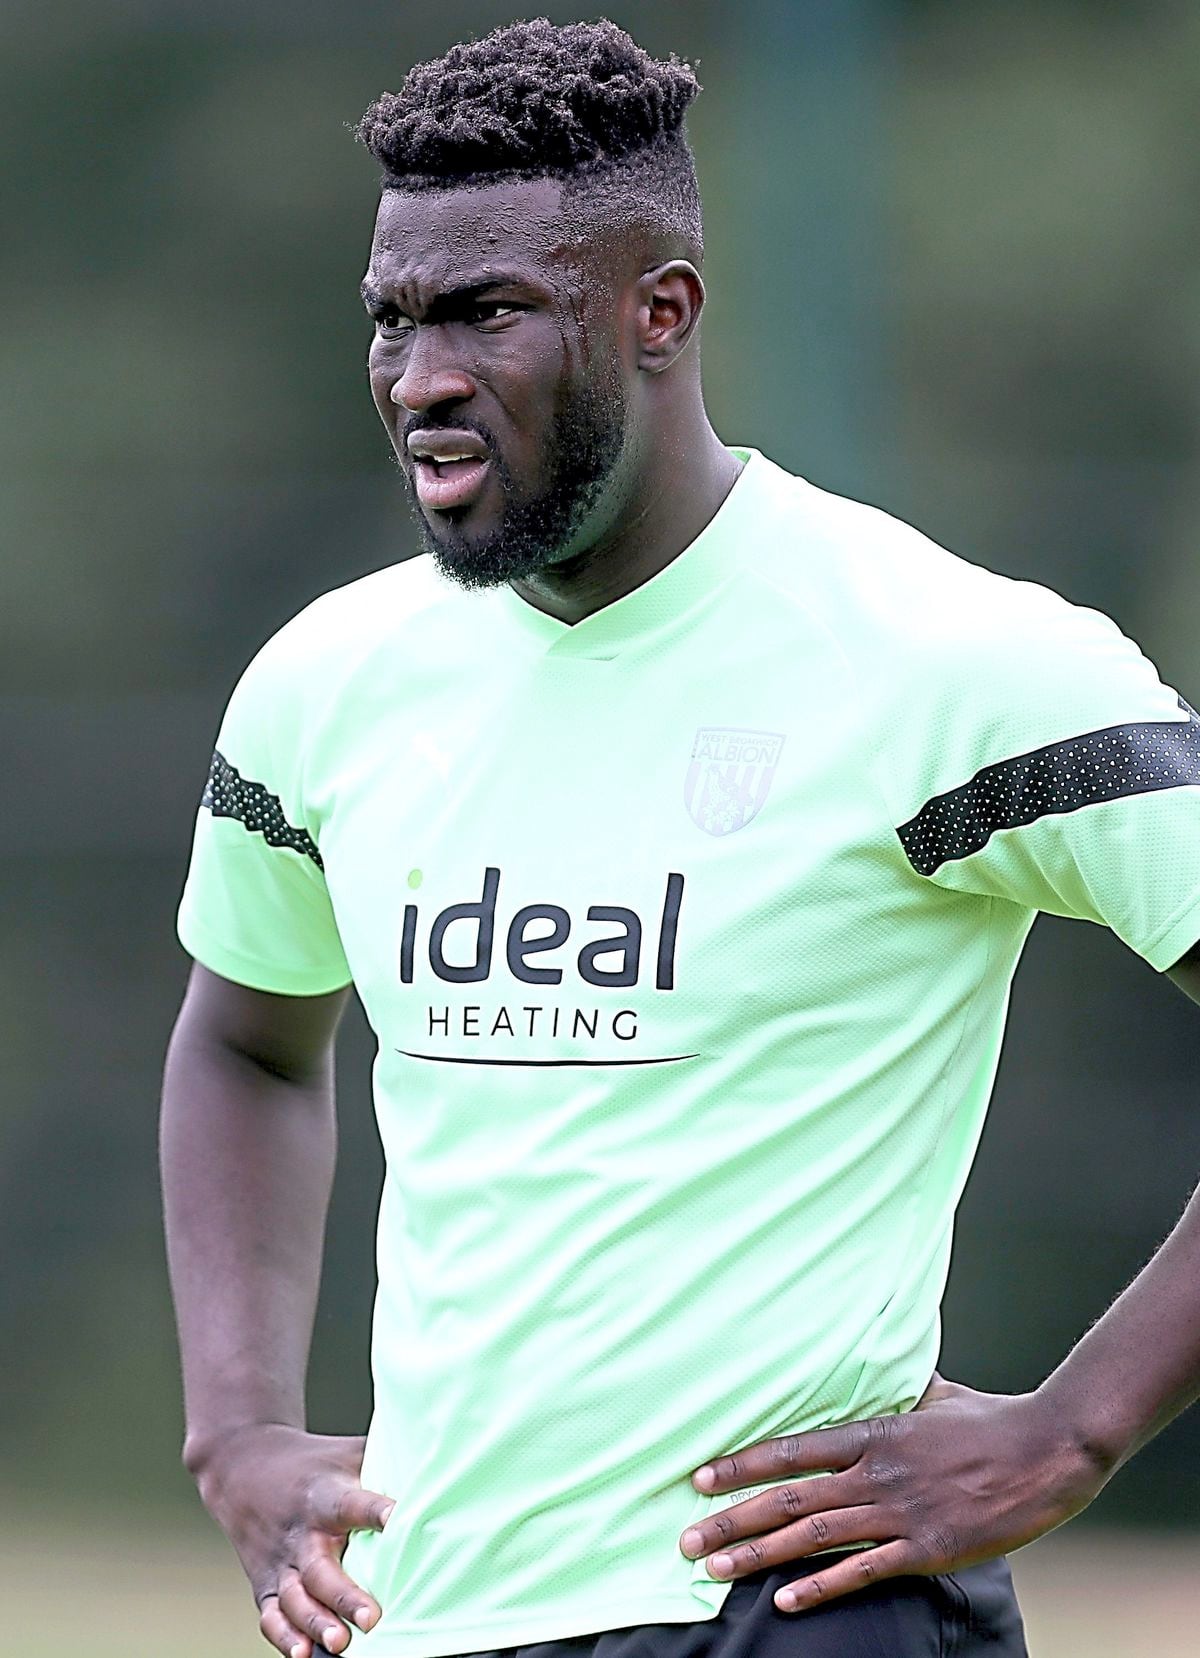 WALSALL, ENGLAND - JUNE 24: Daryl Dike of West Bromwich Albion at West Bromwich Albion Training Ground on June 24, 2022 in Walsall, England. (Photo by Adam Fradgley/West Bromwich Albion FC via Getty Images).